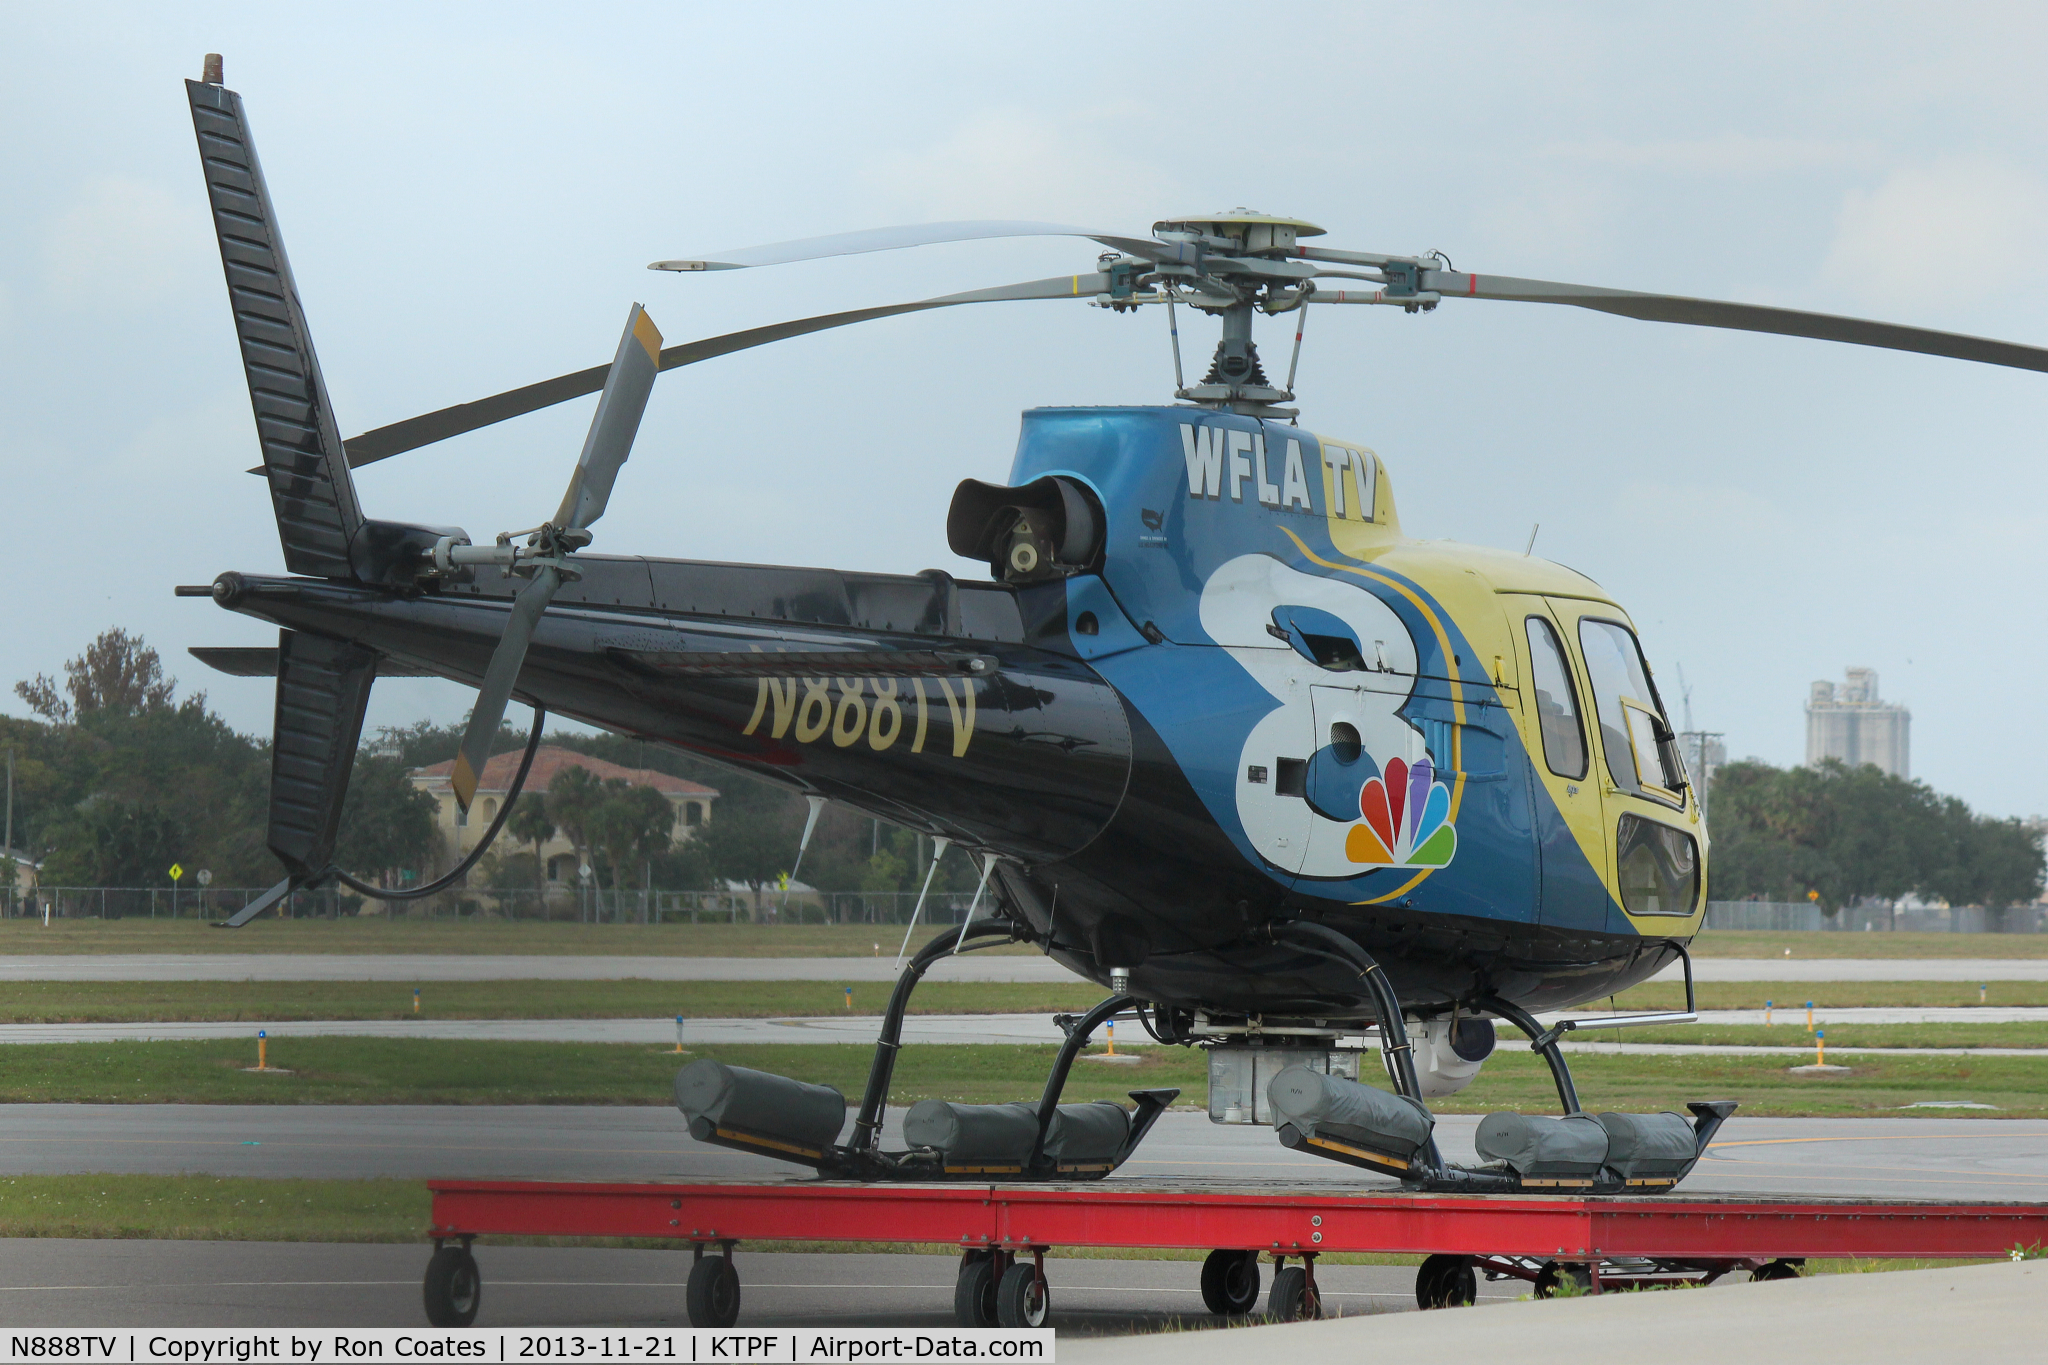 N888TV, 1978 Aerospatiale AS-350B Ecureuil C/N 2007, This 1978 Aerospatiale news helicopter belonging to WLFA TV in Tampa Florida sits on its landing skid at the Peter O Knight Airport